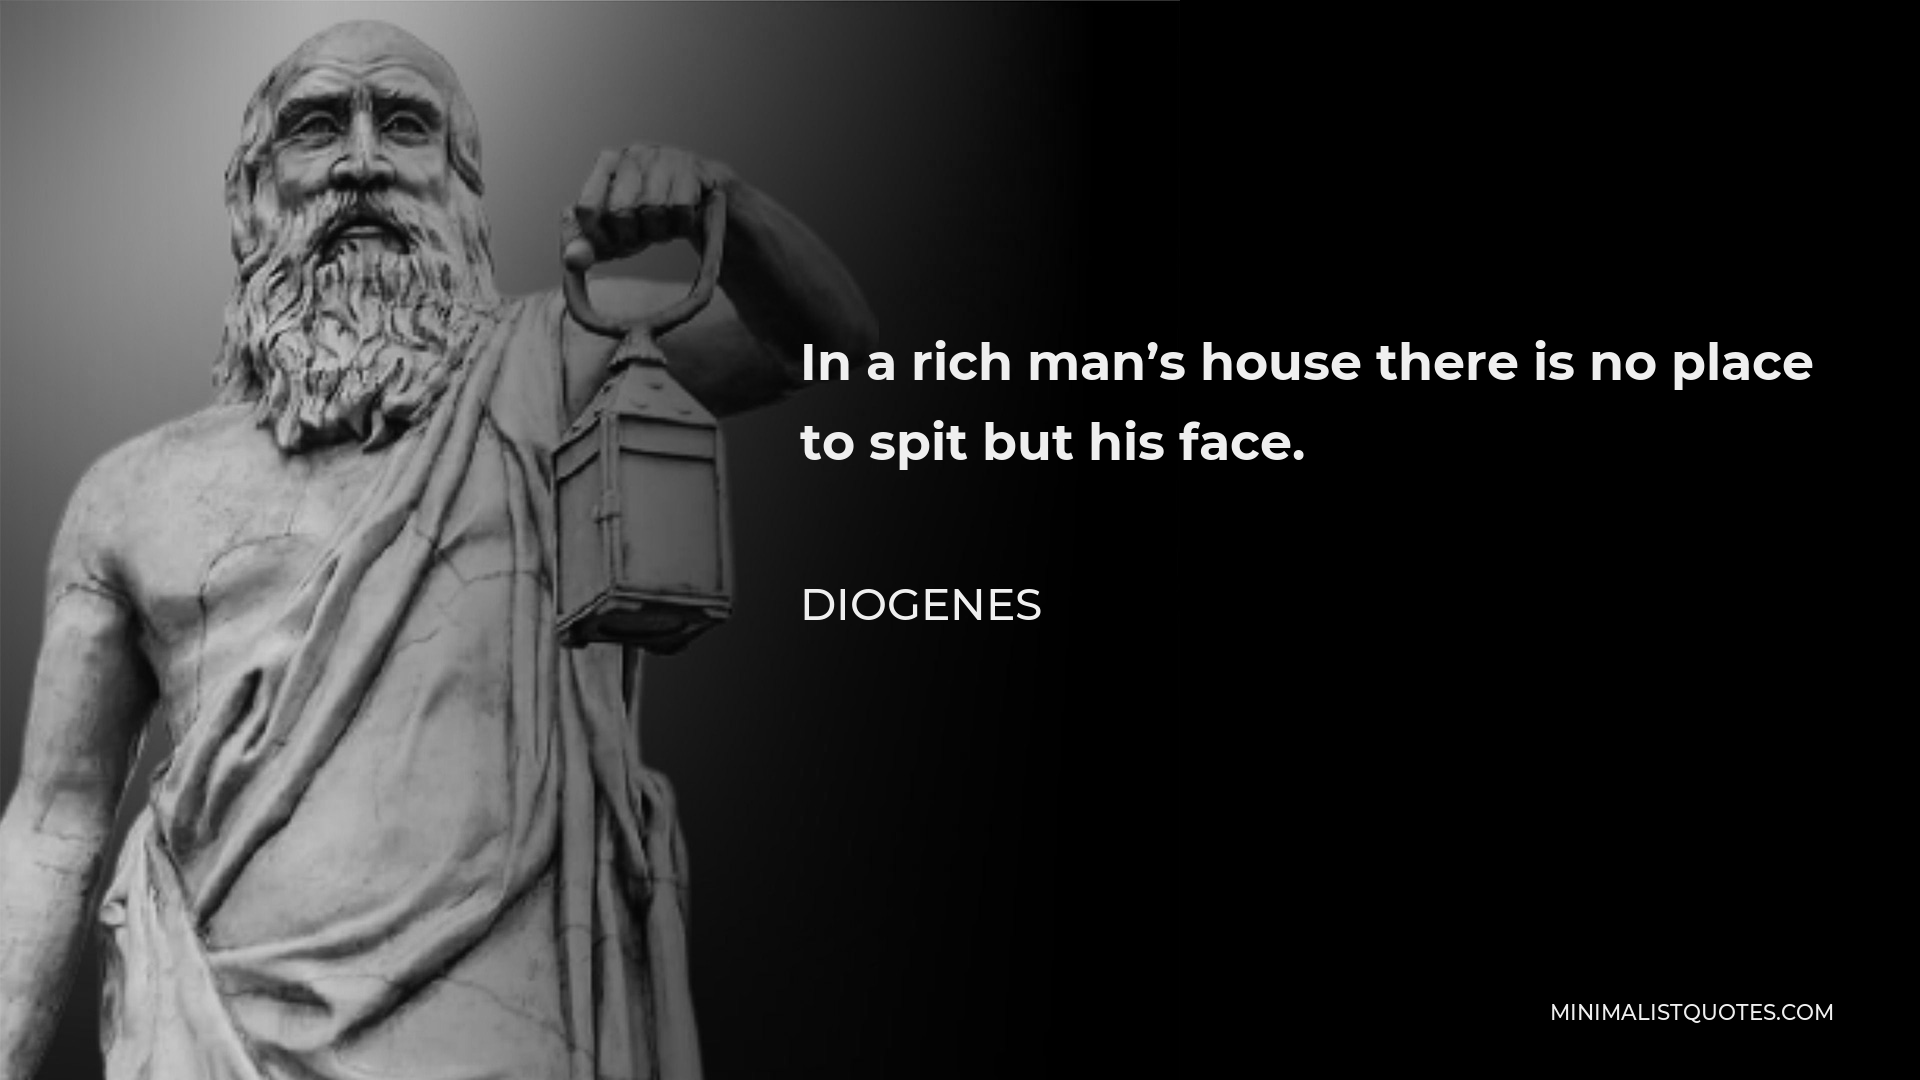 In a rich man’s house there is no place to spit but his face. -Diogenes